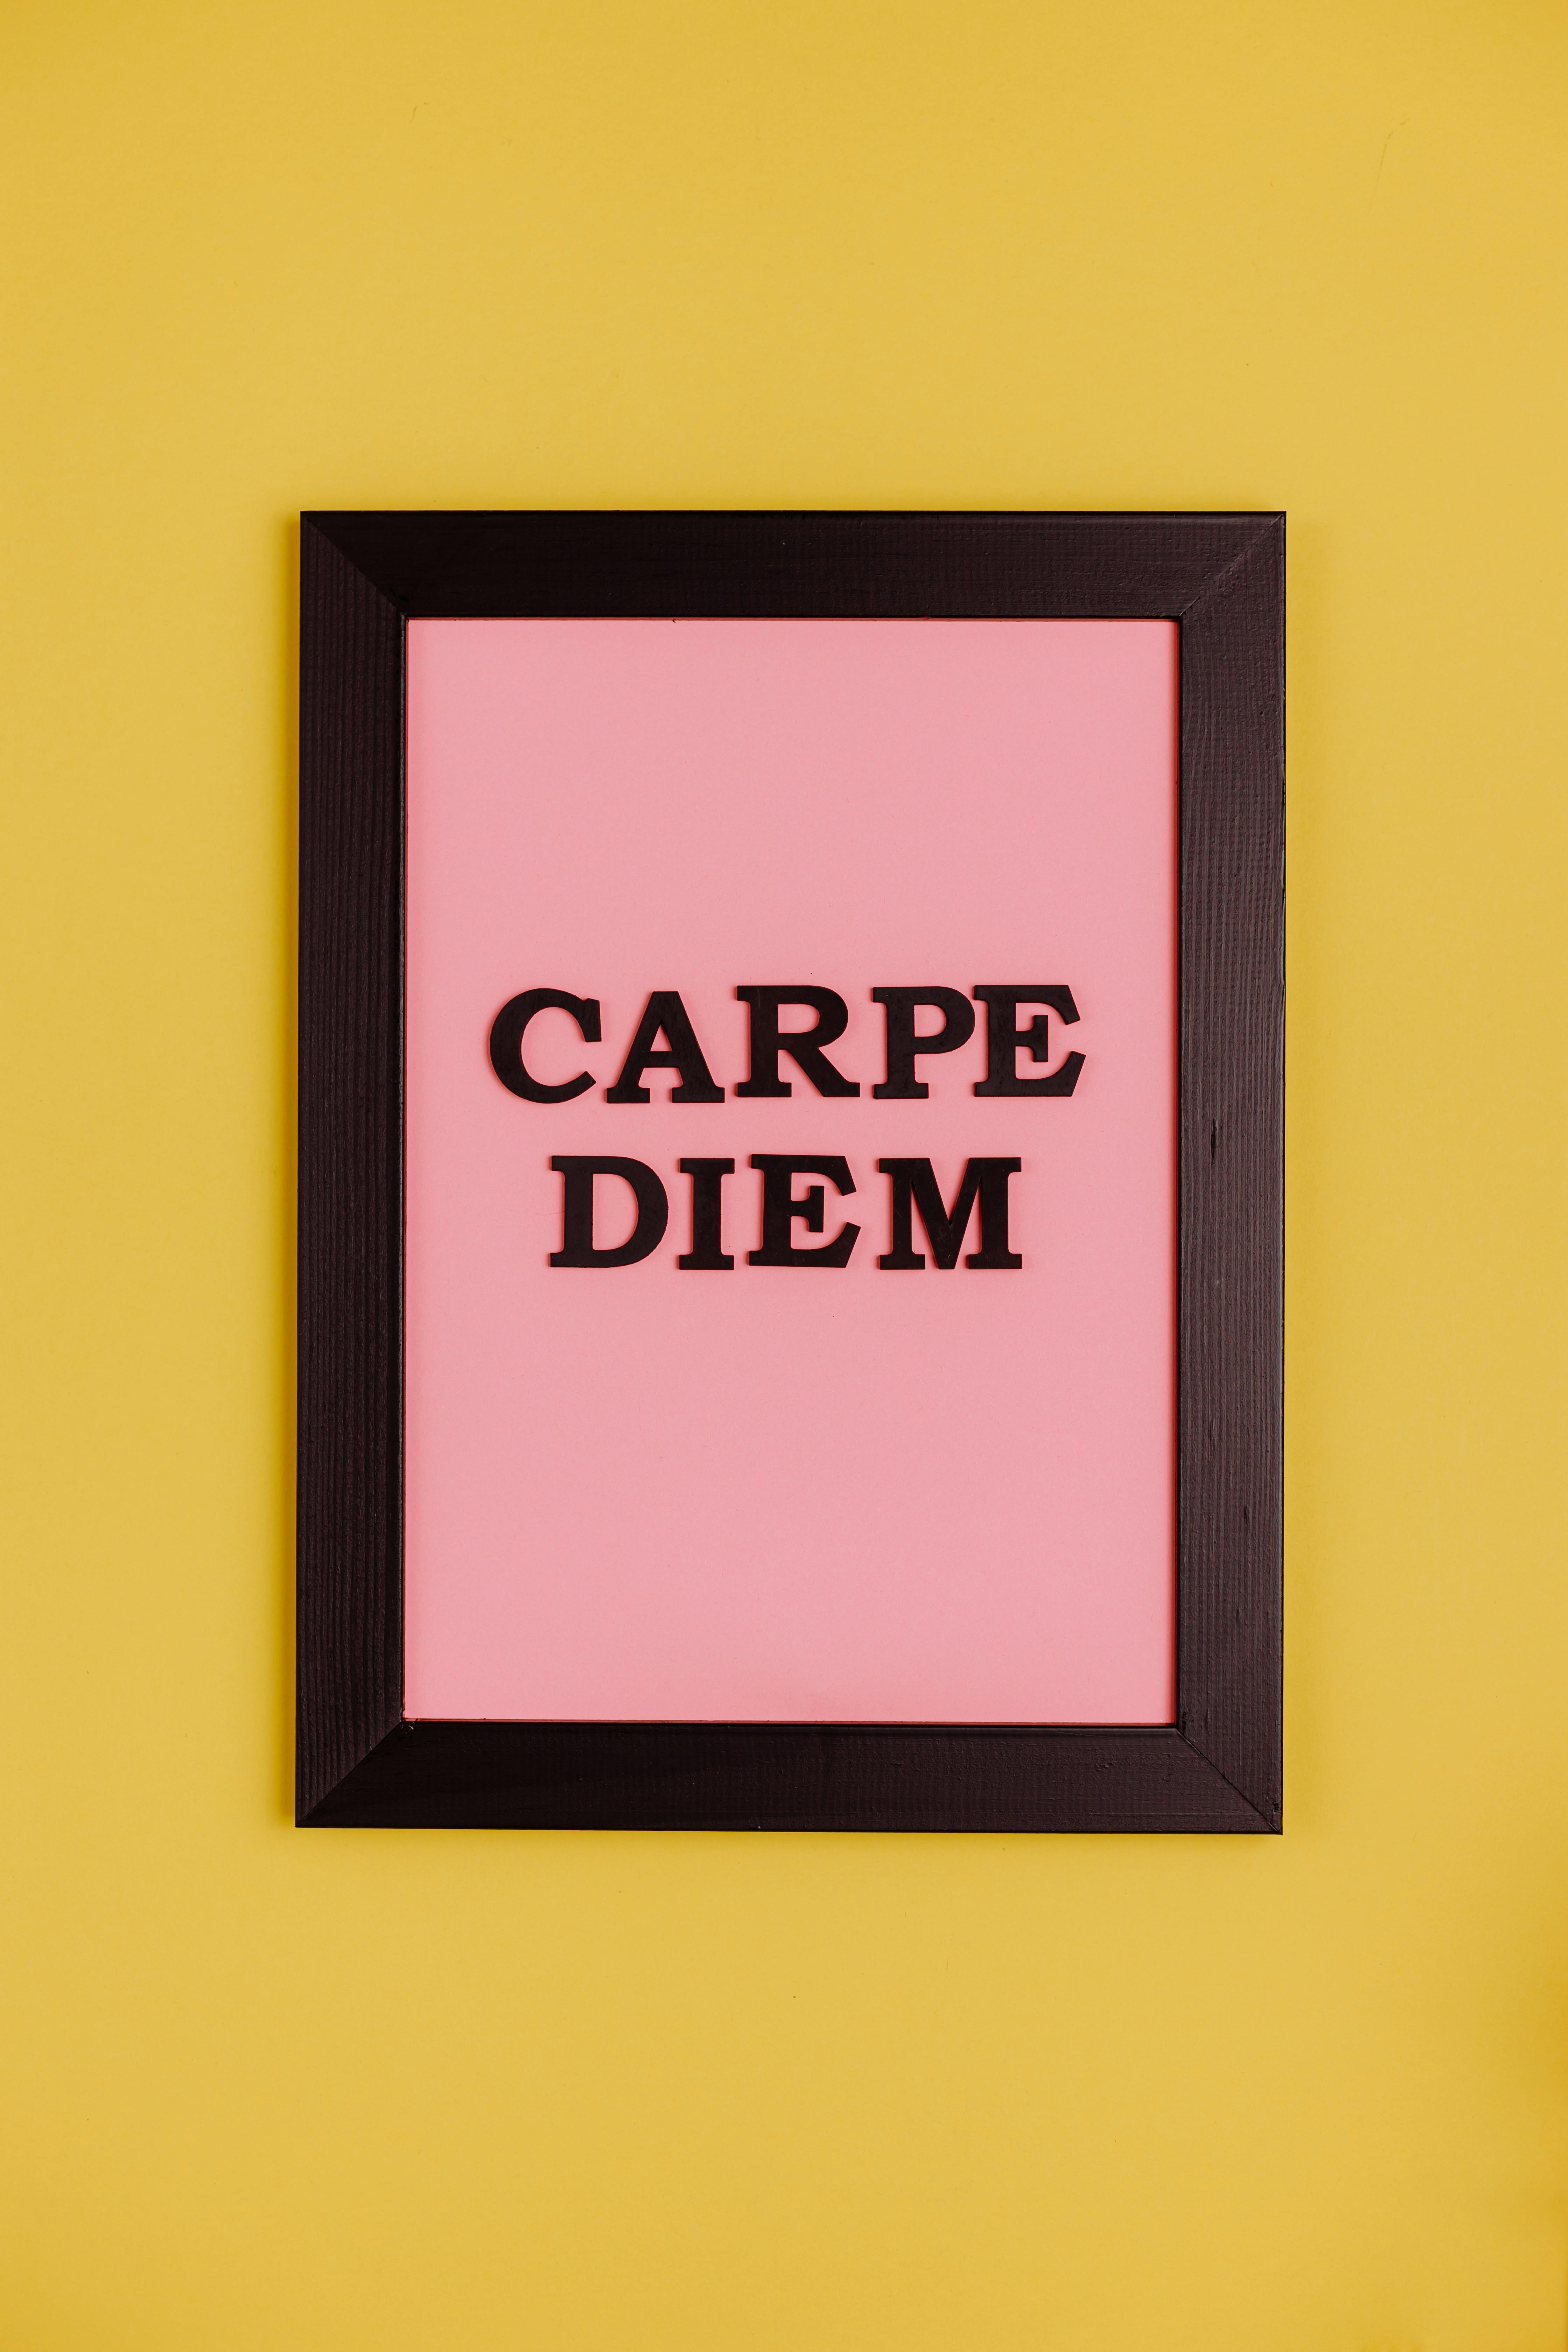 Carpe Diem Images | Free Photos, PNG Stickers, Wallpapers & Backgrounds -  rawpixel